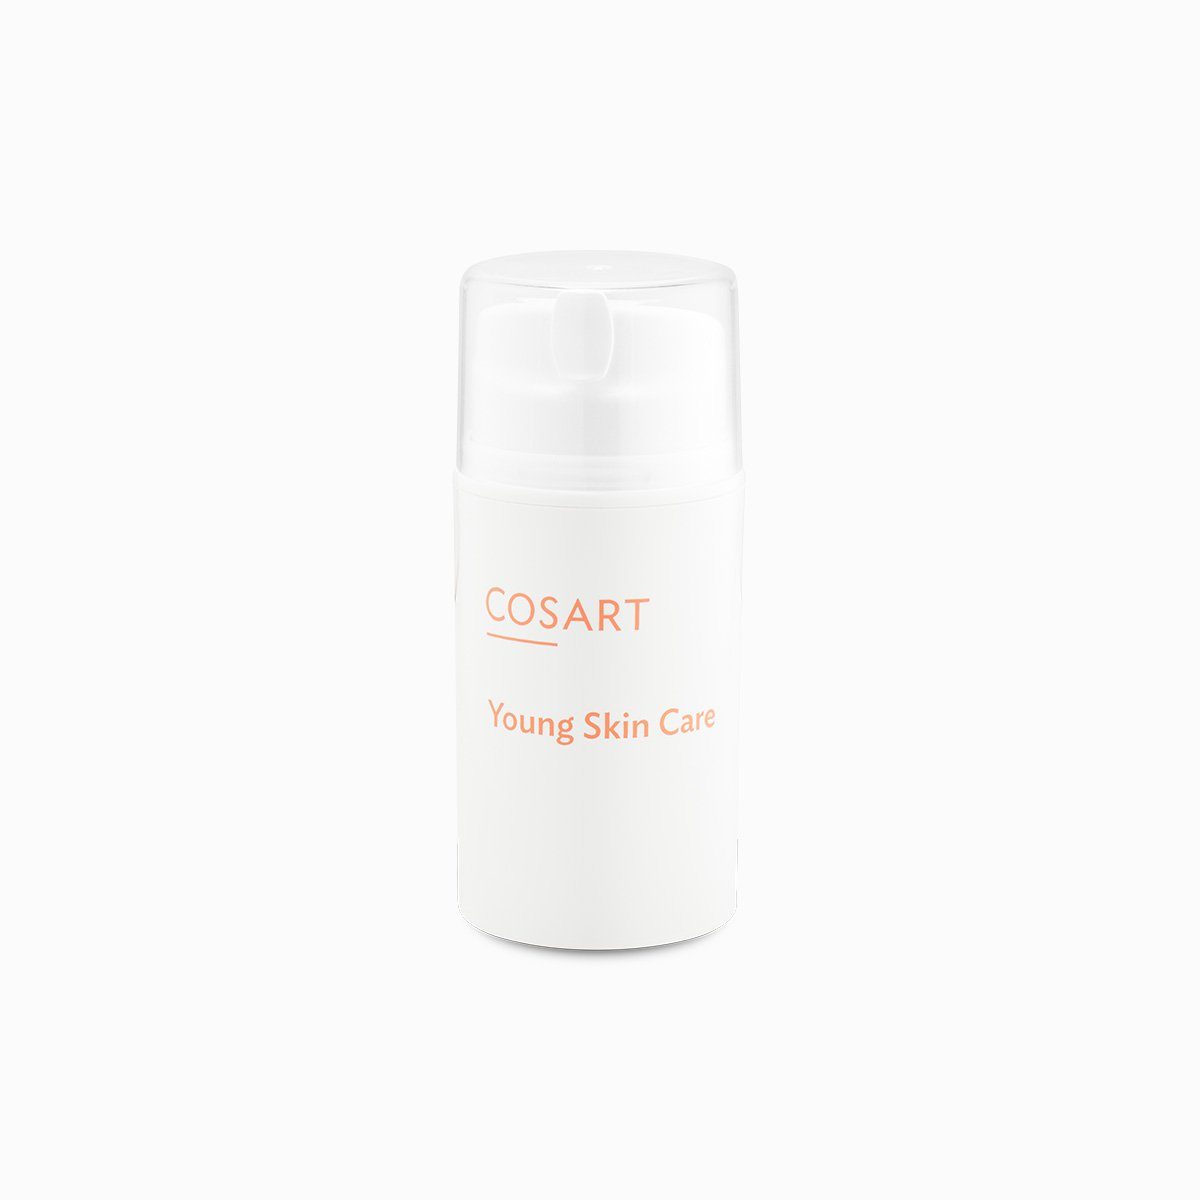 Young Care COSART ml) Gesichtspflege Skin (50